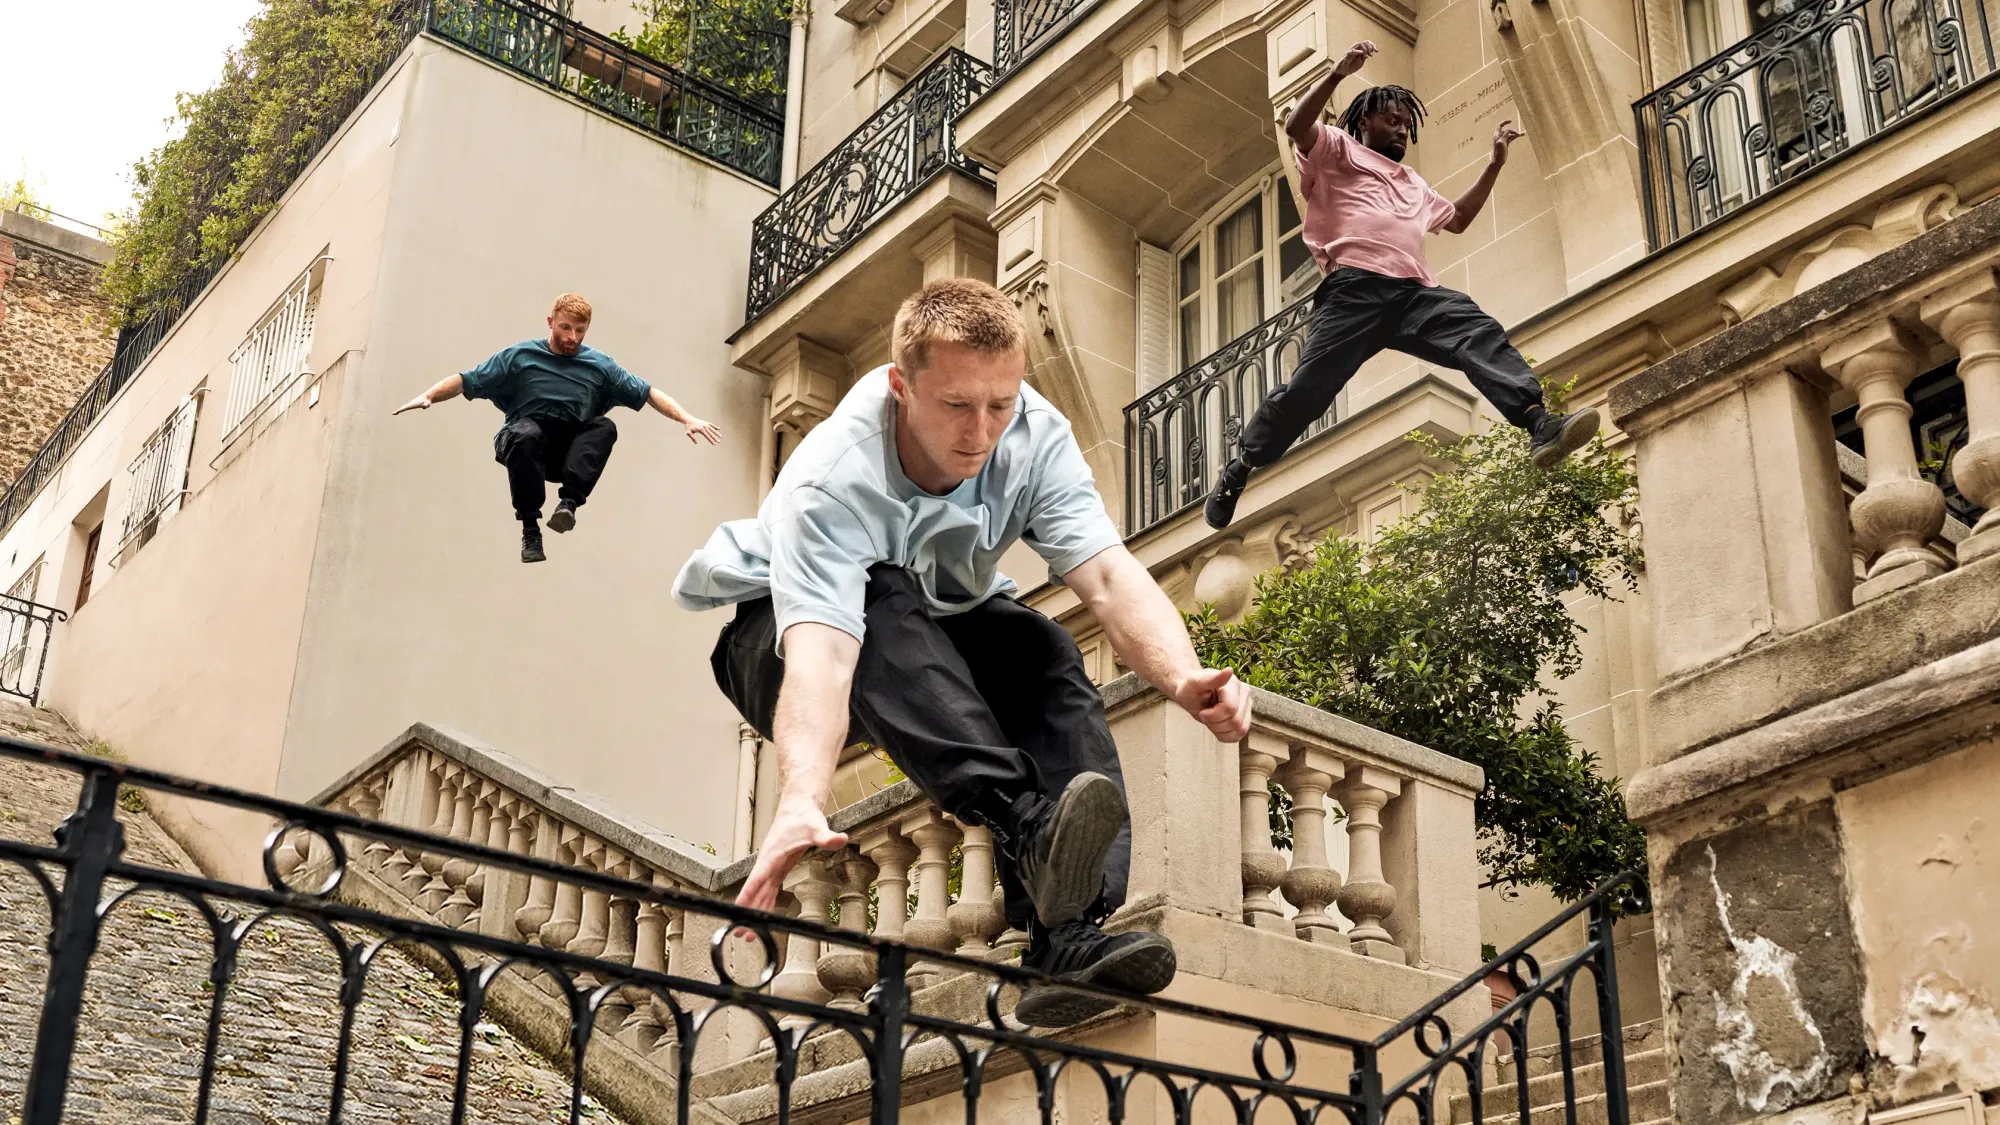 new-parkour-apple-immersive-video-out-now-on-apple-vision-pro